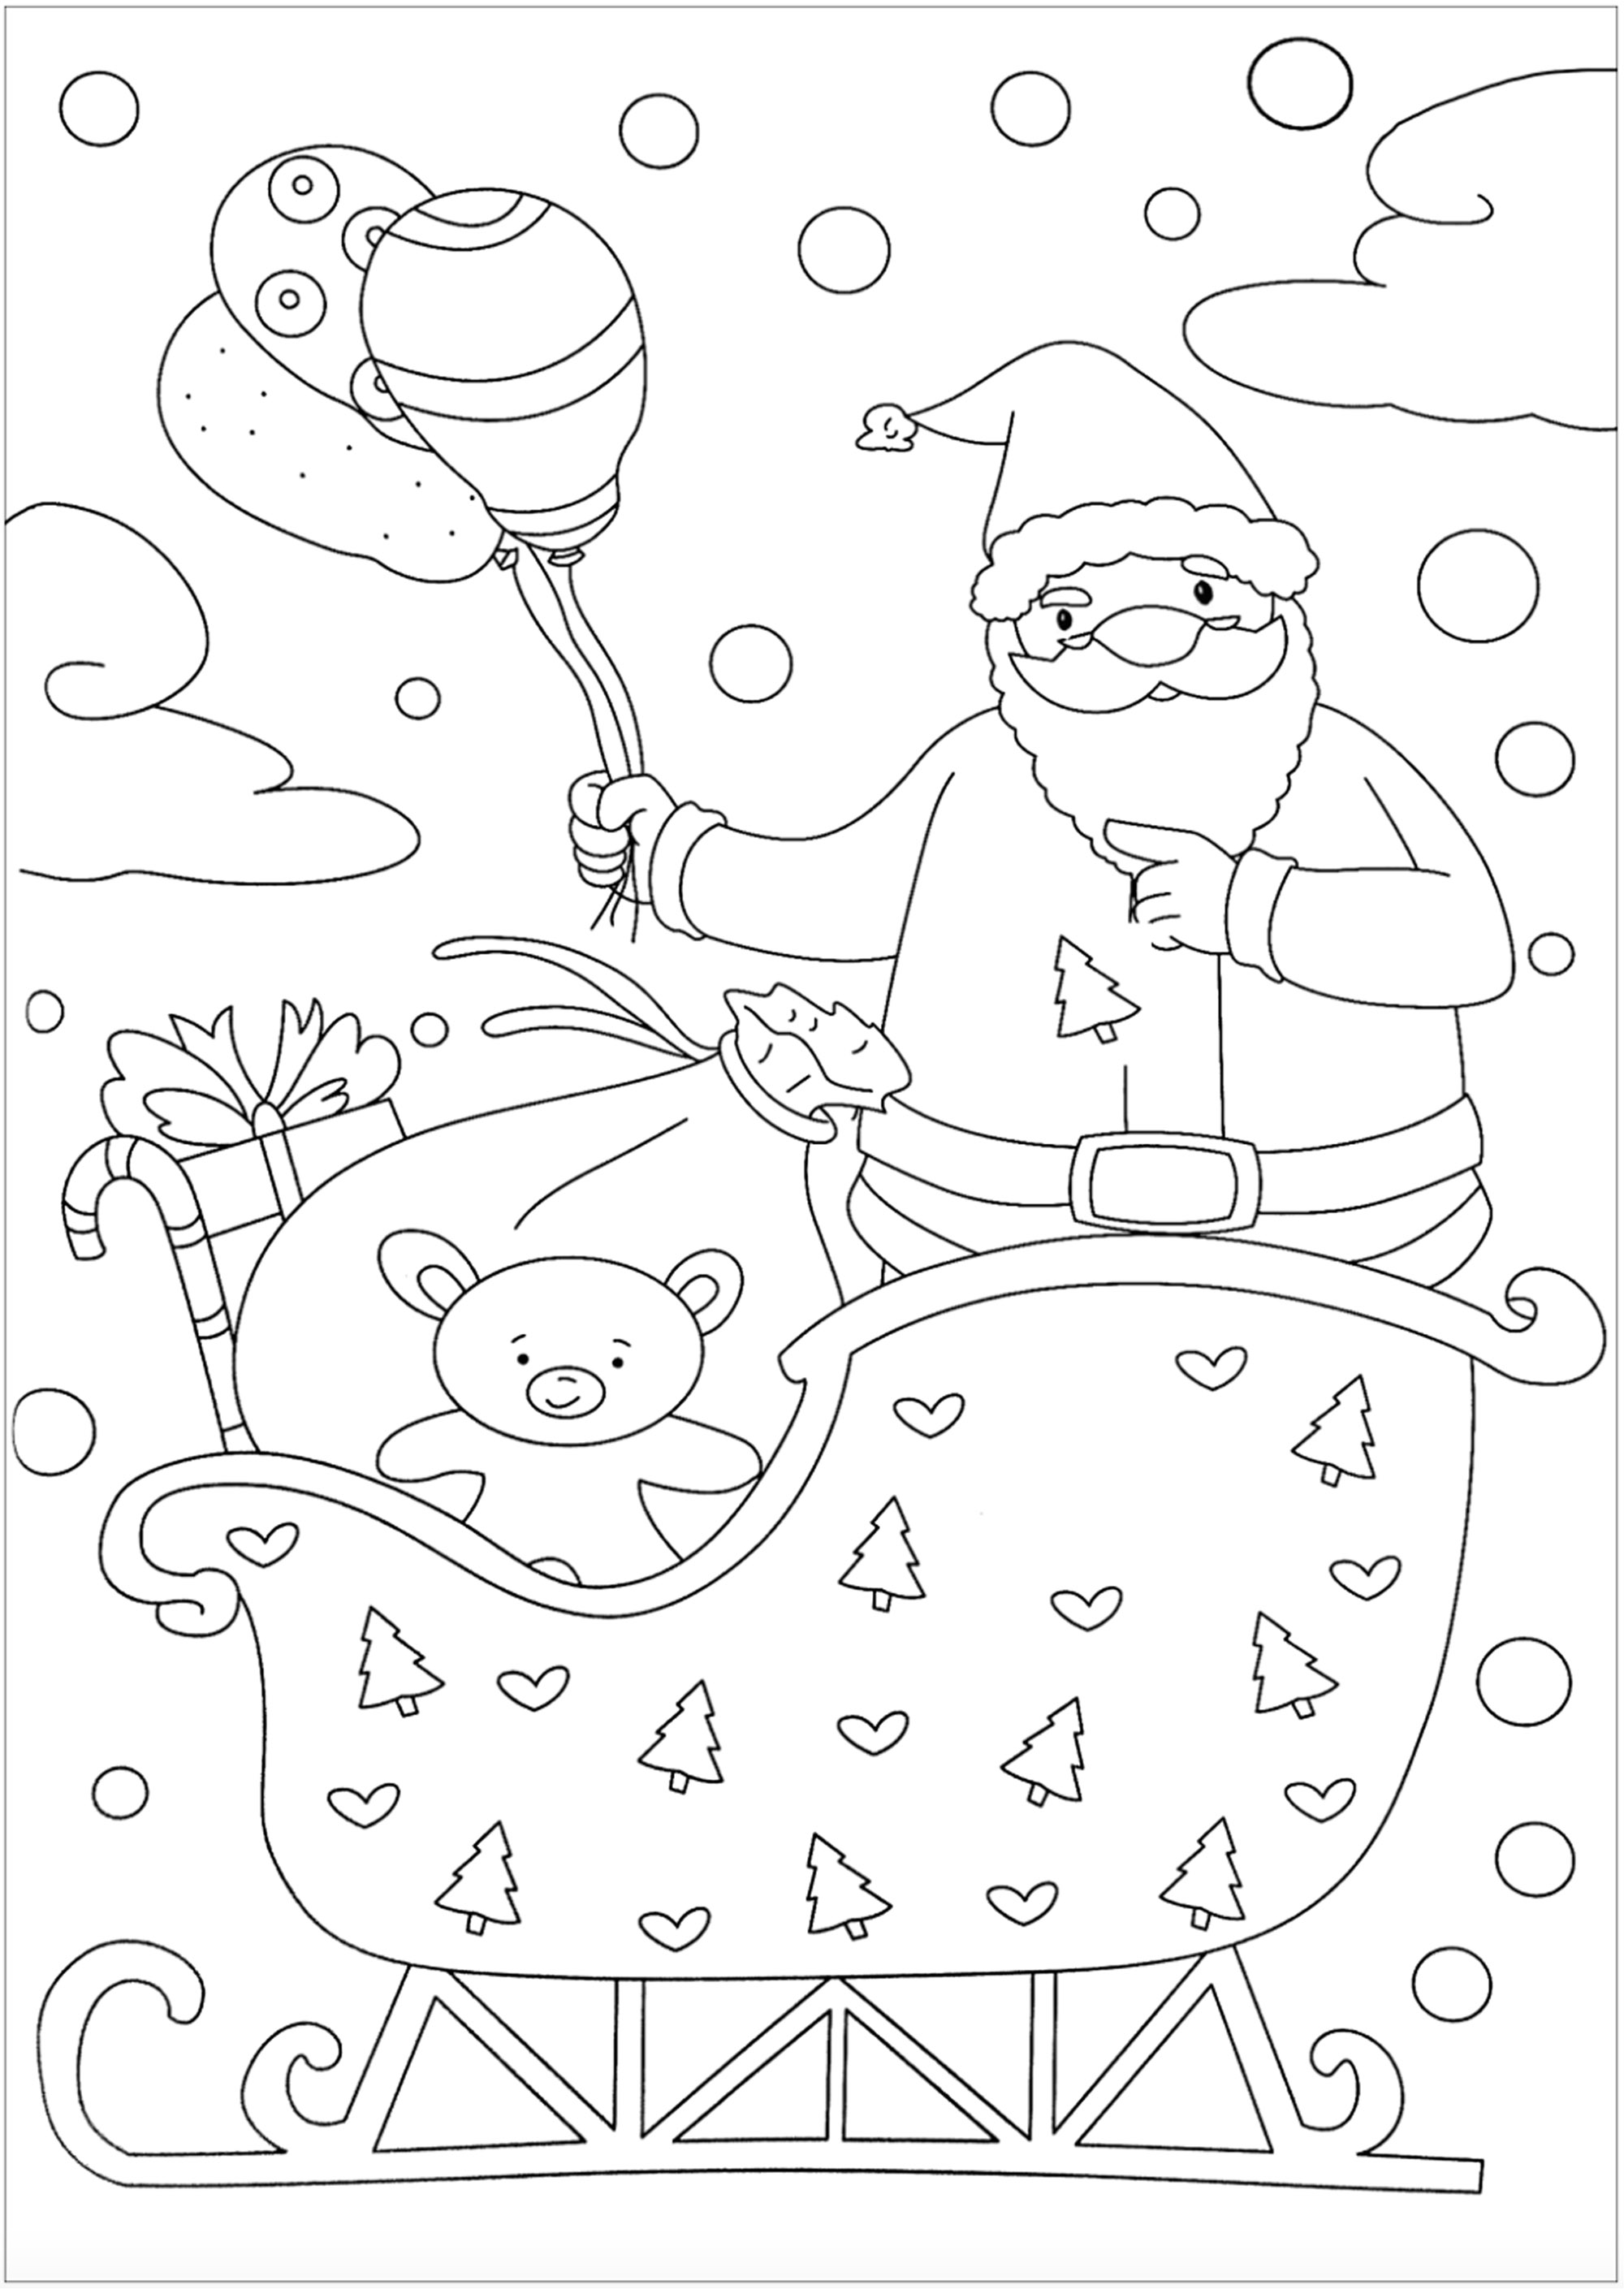 A beautiful Santa Claus to color, with pretty balloons.  He is in his sleigh with presents and a cuddly toy